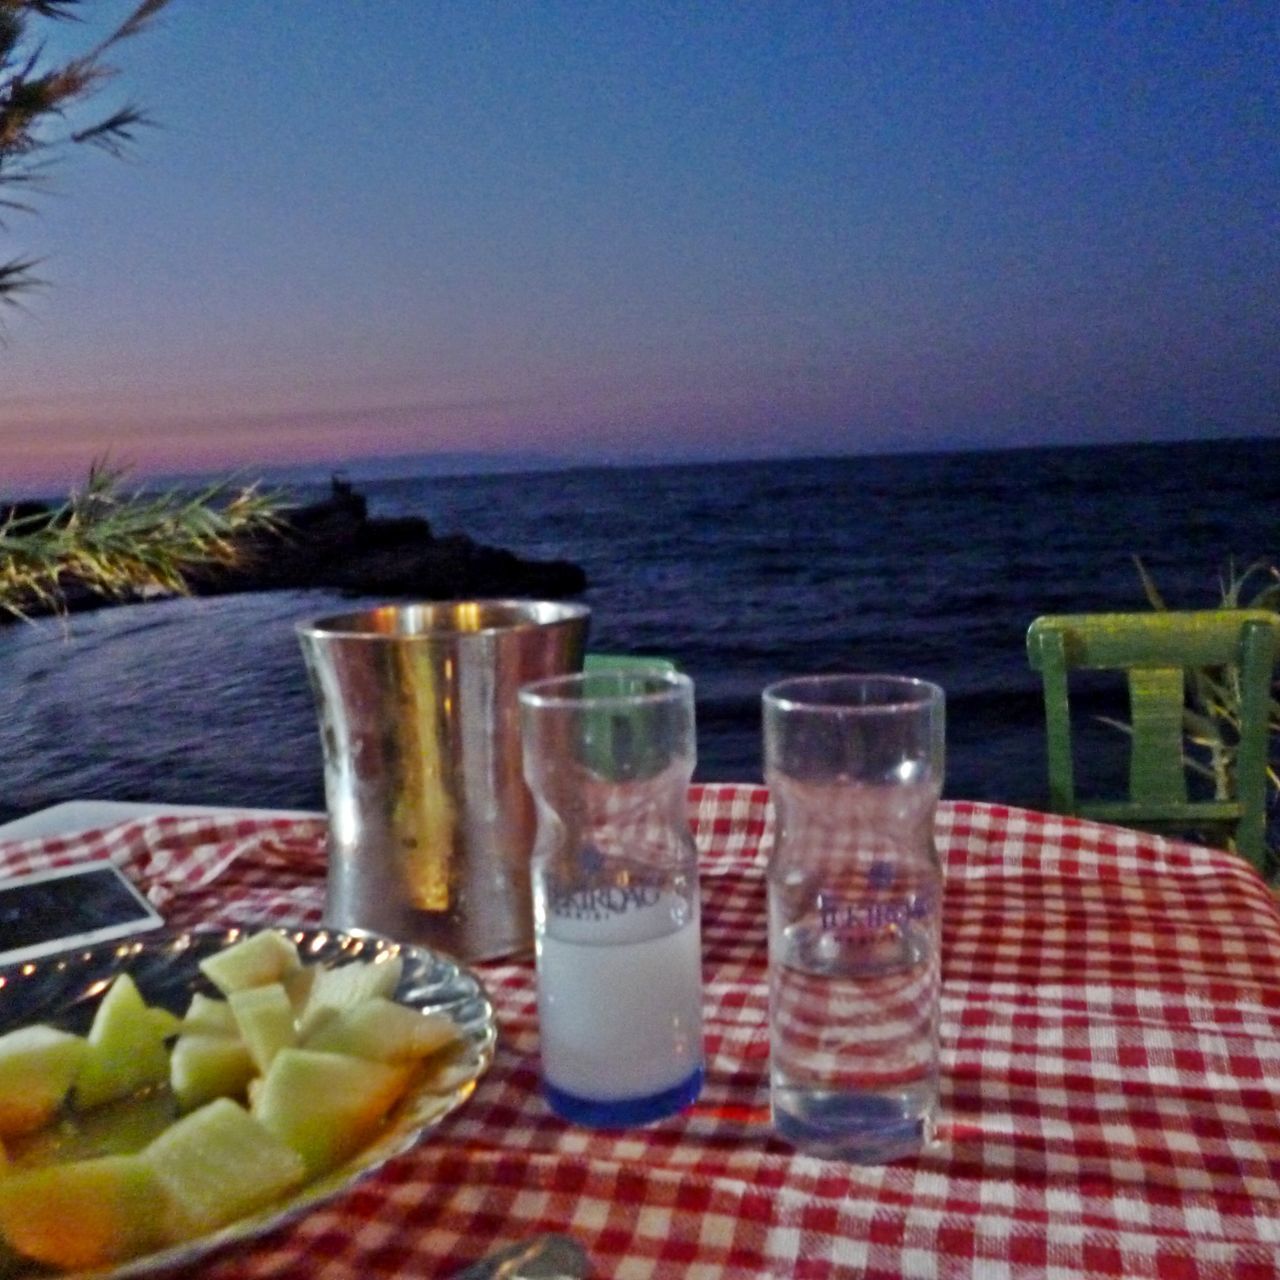 food and drink, table, fruit, sea, food, water, horizon over water, healthy eating, outdoors, drinking glass, tablecloth, plate, no people, beach, freshness, slice, day, picnic, drink, clear sky, nature, sky, ready-to-eat